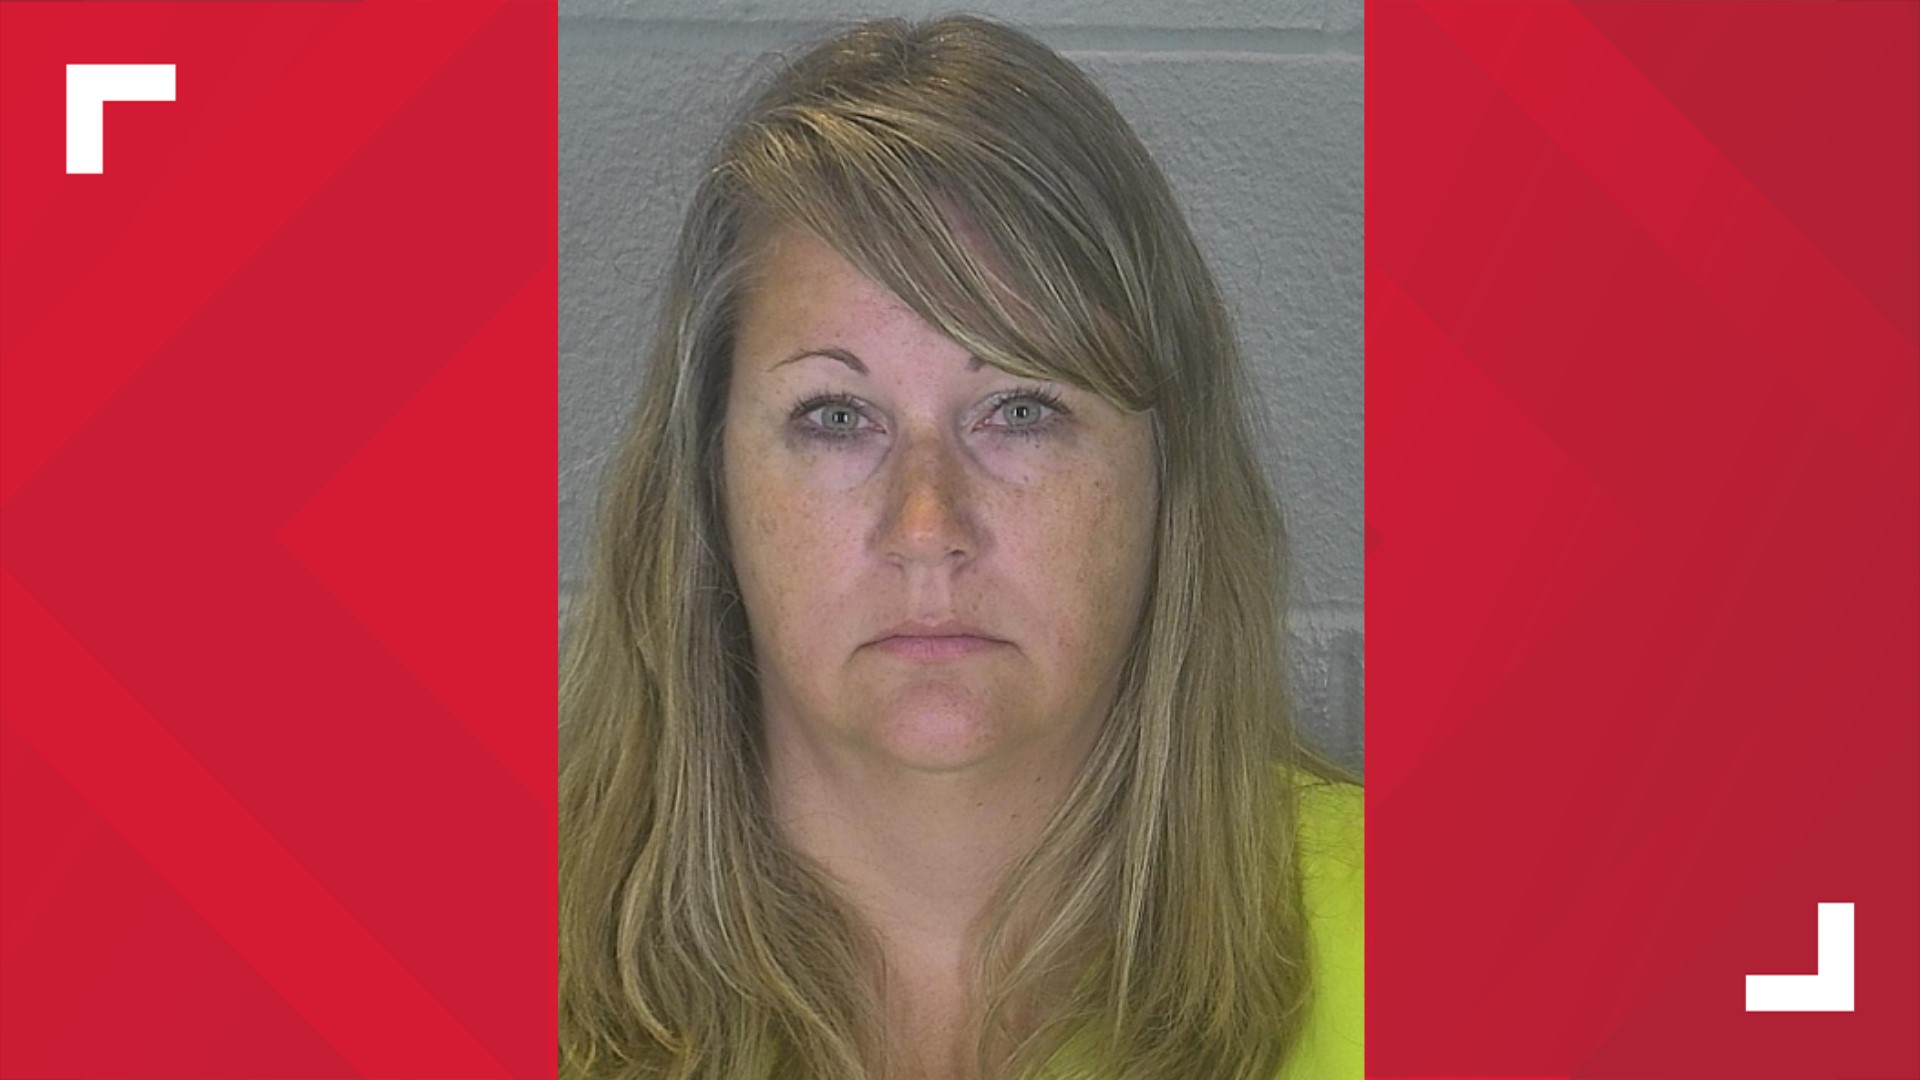 Seven days ago, 43-year-old Tracy Bondurant was in court facing felony charges of theft and fraud. Thursday, Bodurant and her 5 year old daughter were found dead.